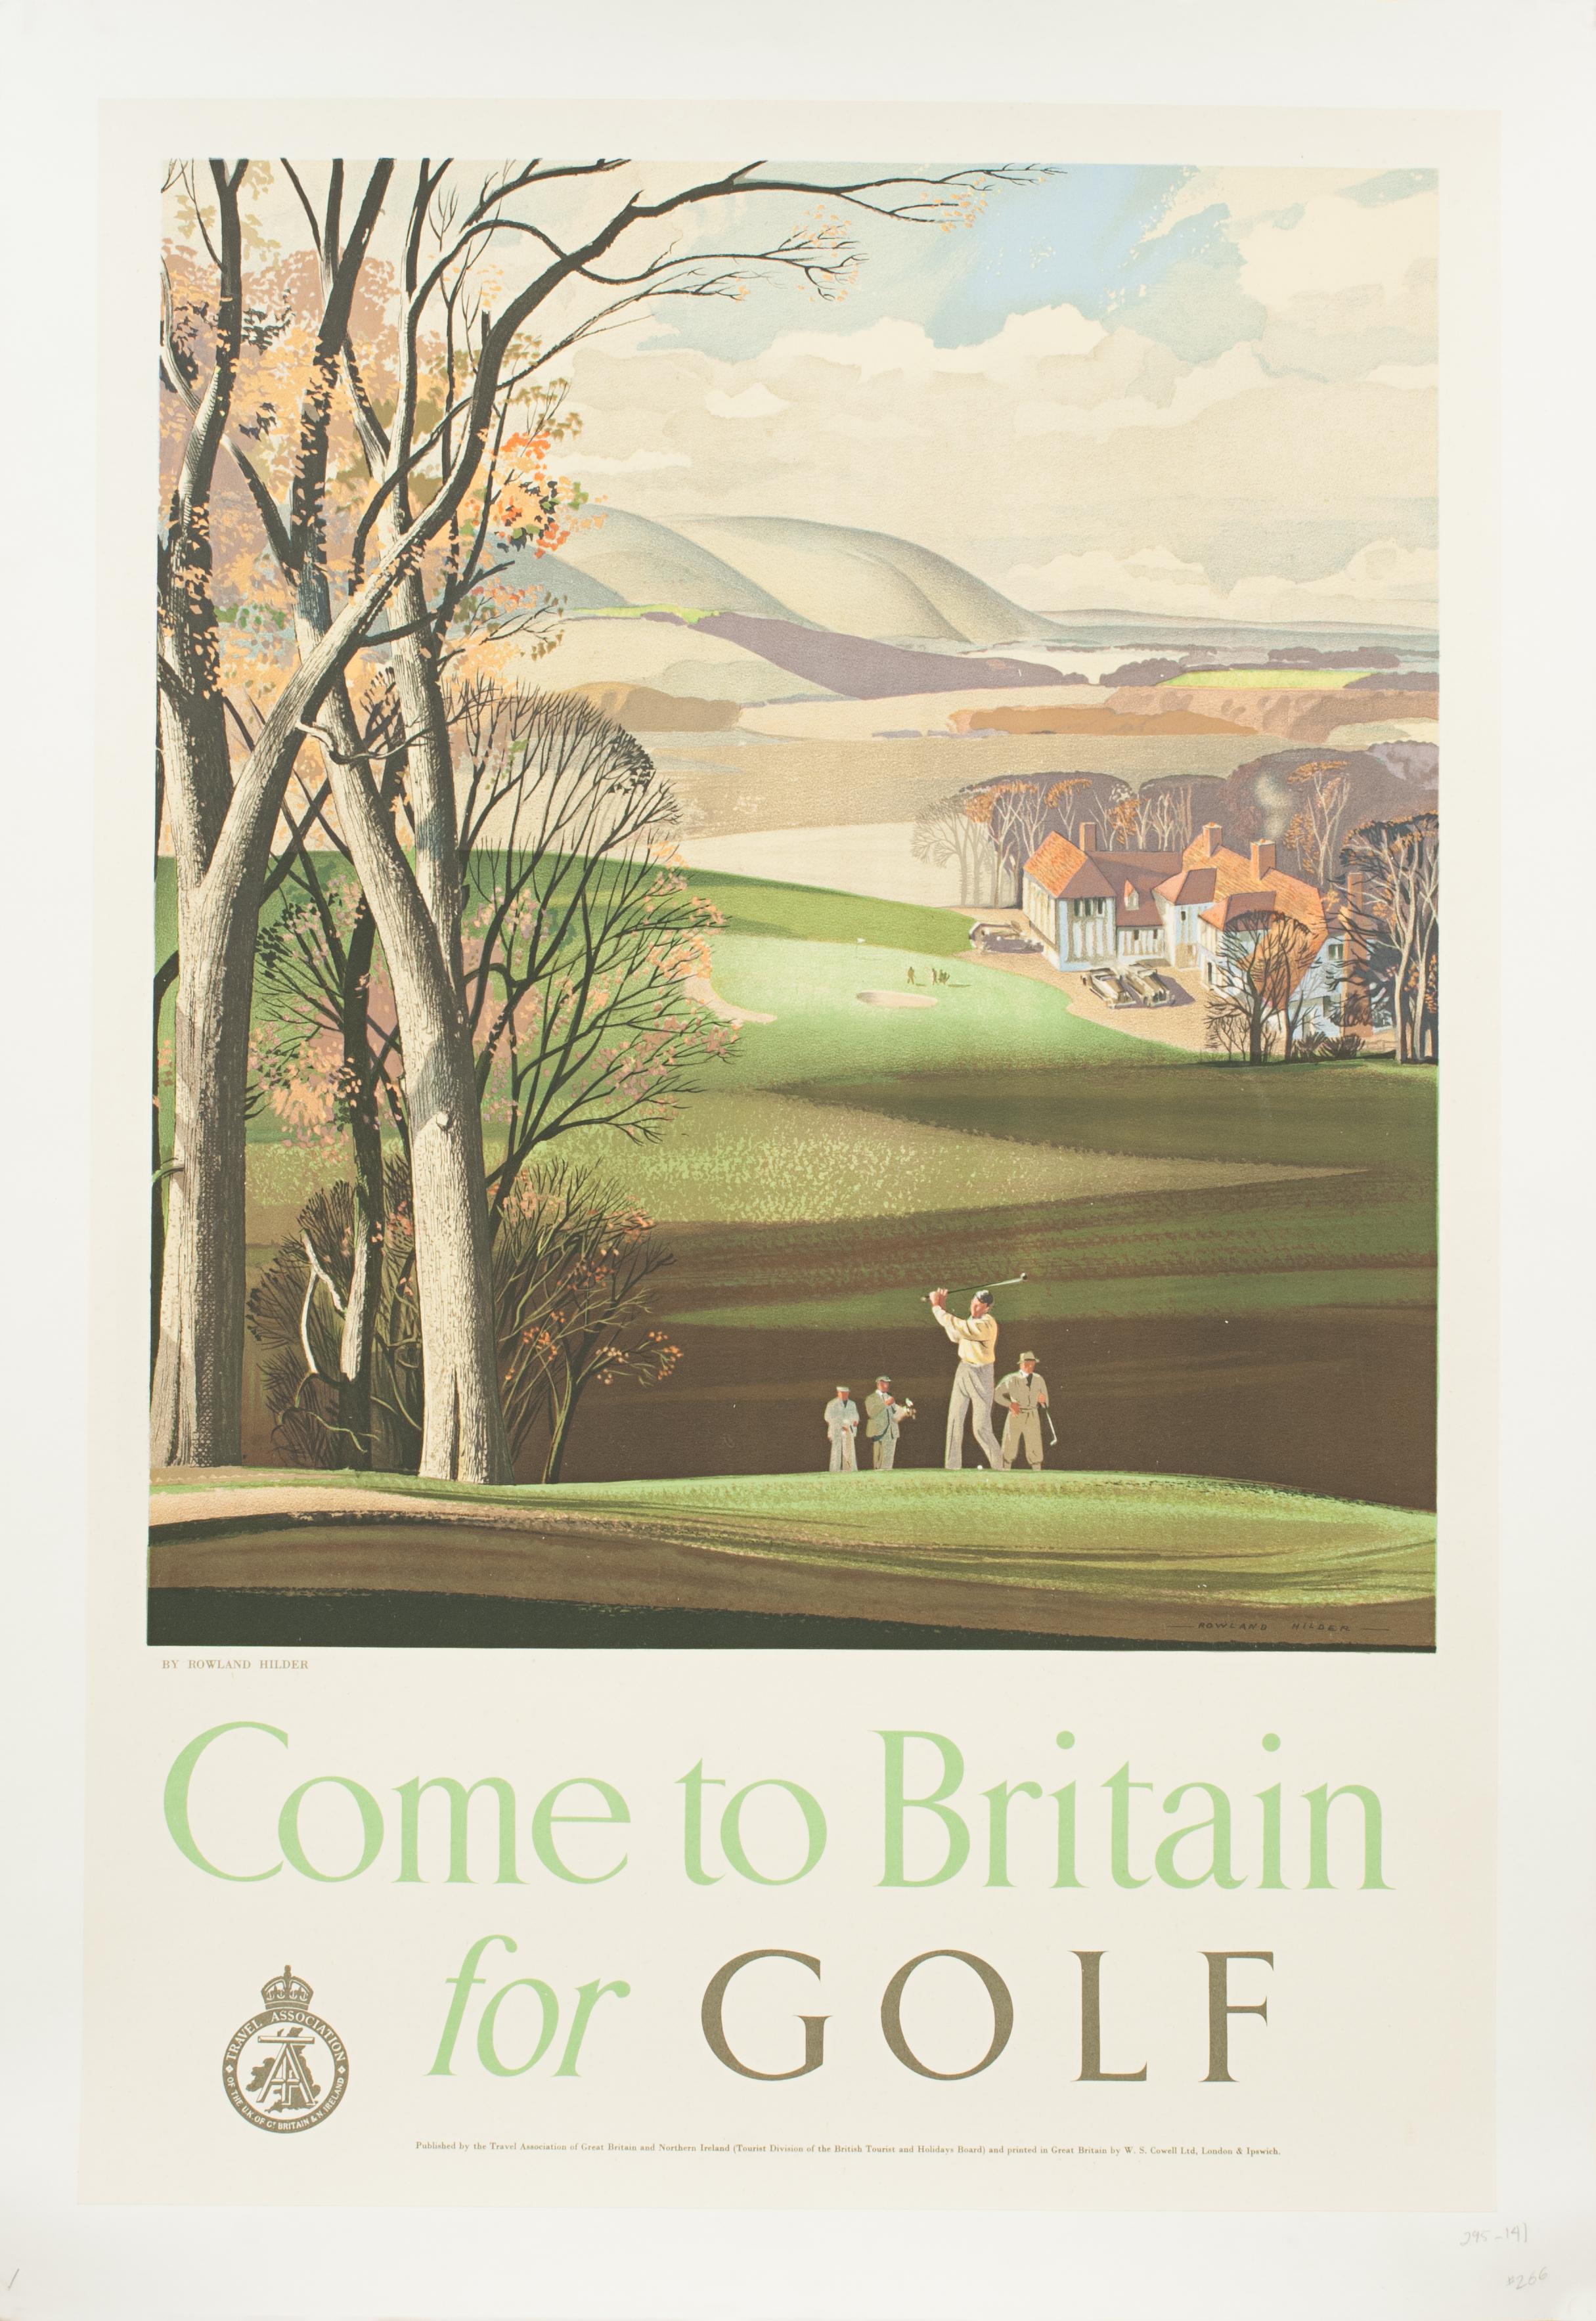 Vintage golfing travel poster, 'Come to Britain for Golf' by Roland Hilder.
A striking golfing poster by Rowland Hilder entitled 'Come to Britain for Golf' relined on linen. The Travel Association of Great Britain and Northern Ireland published the